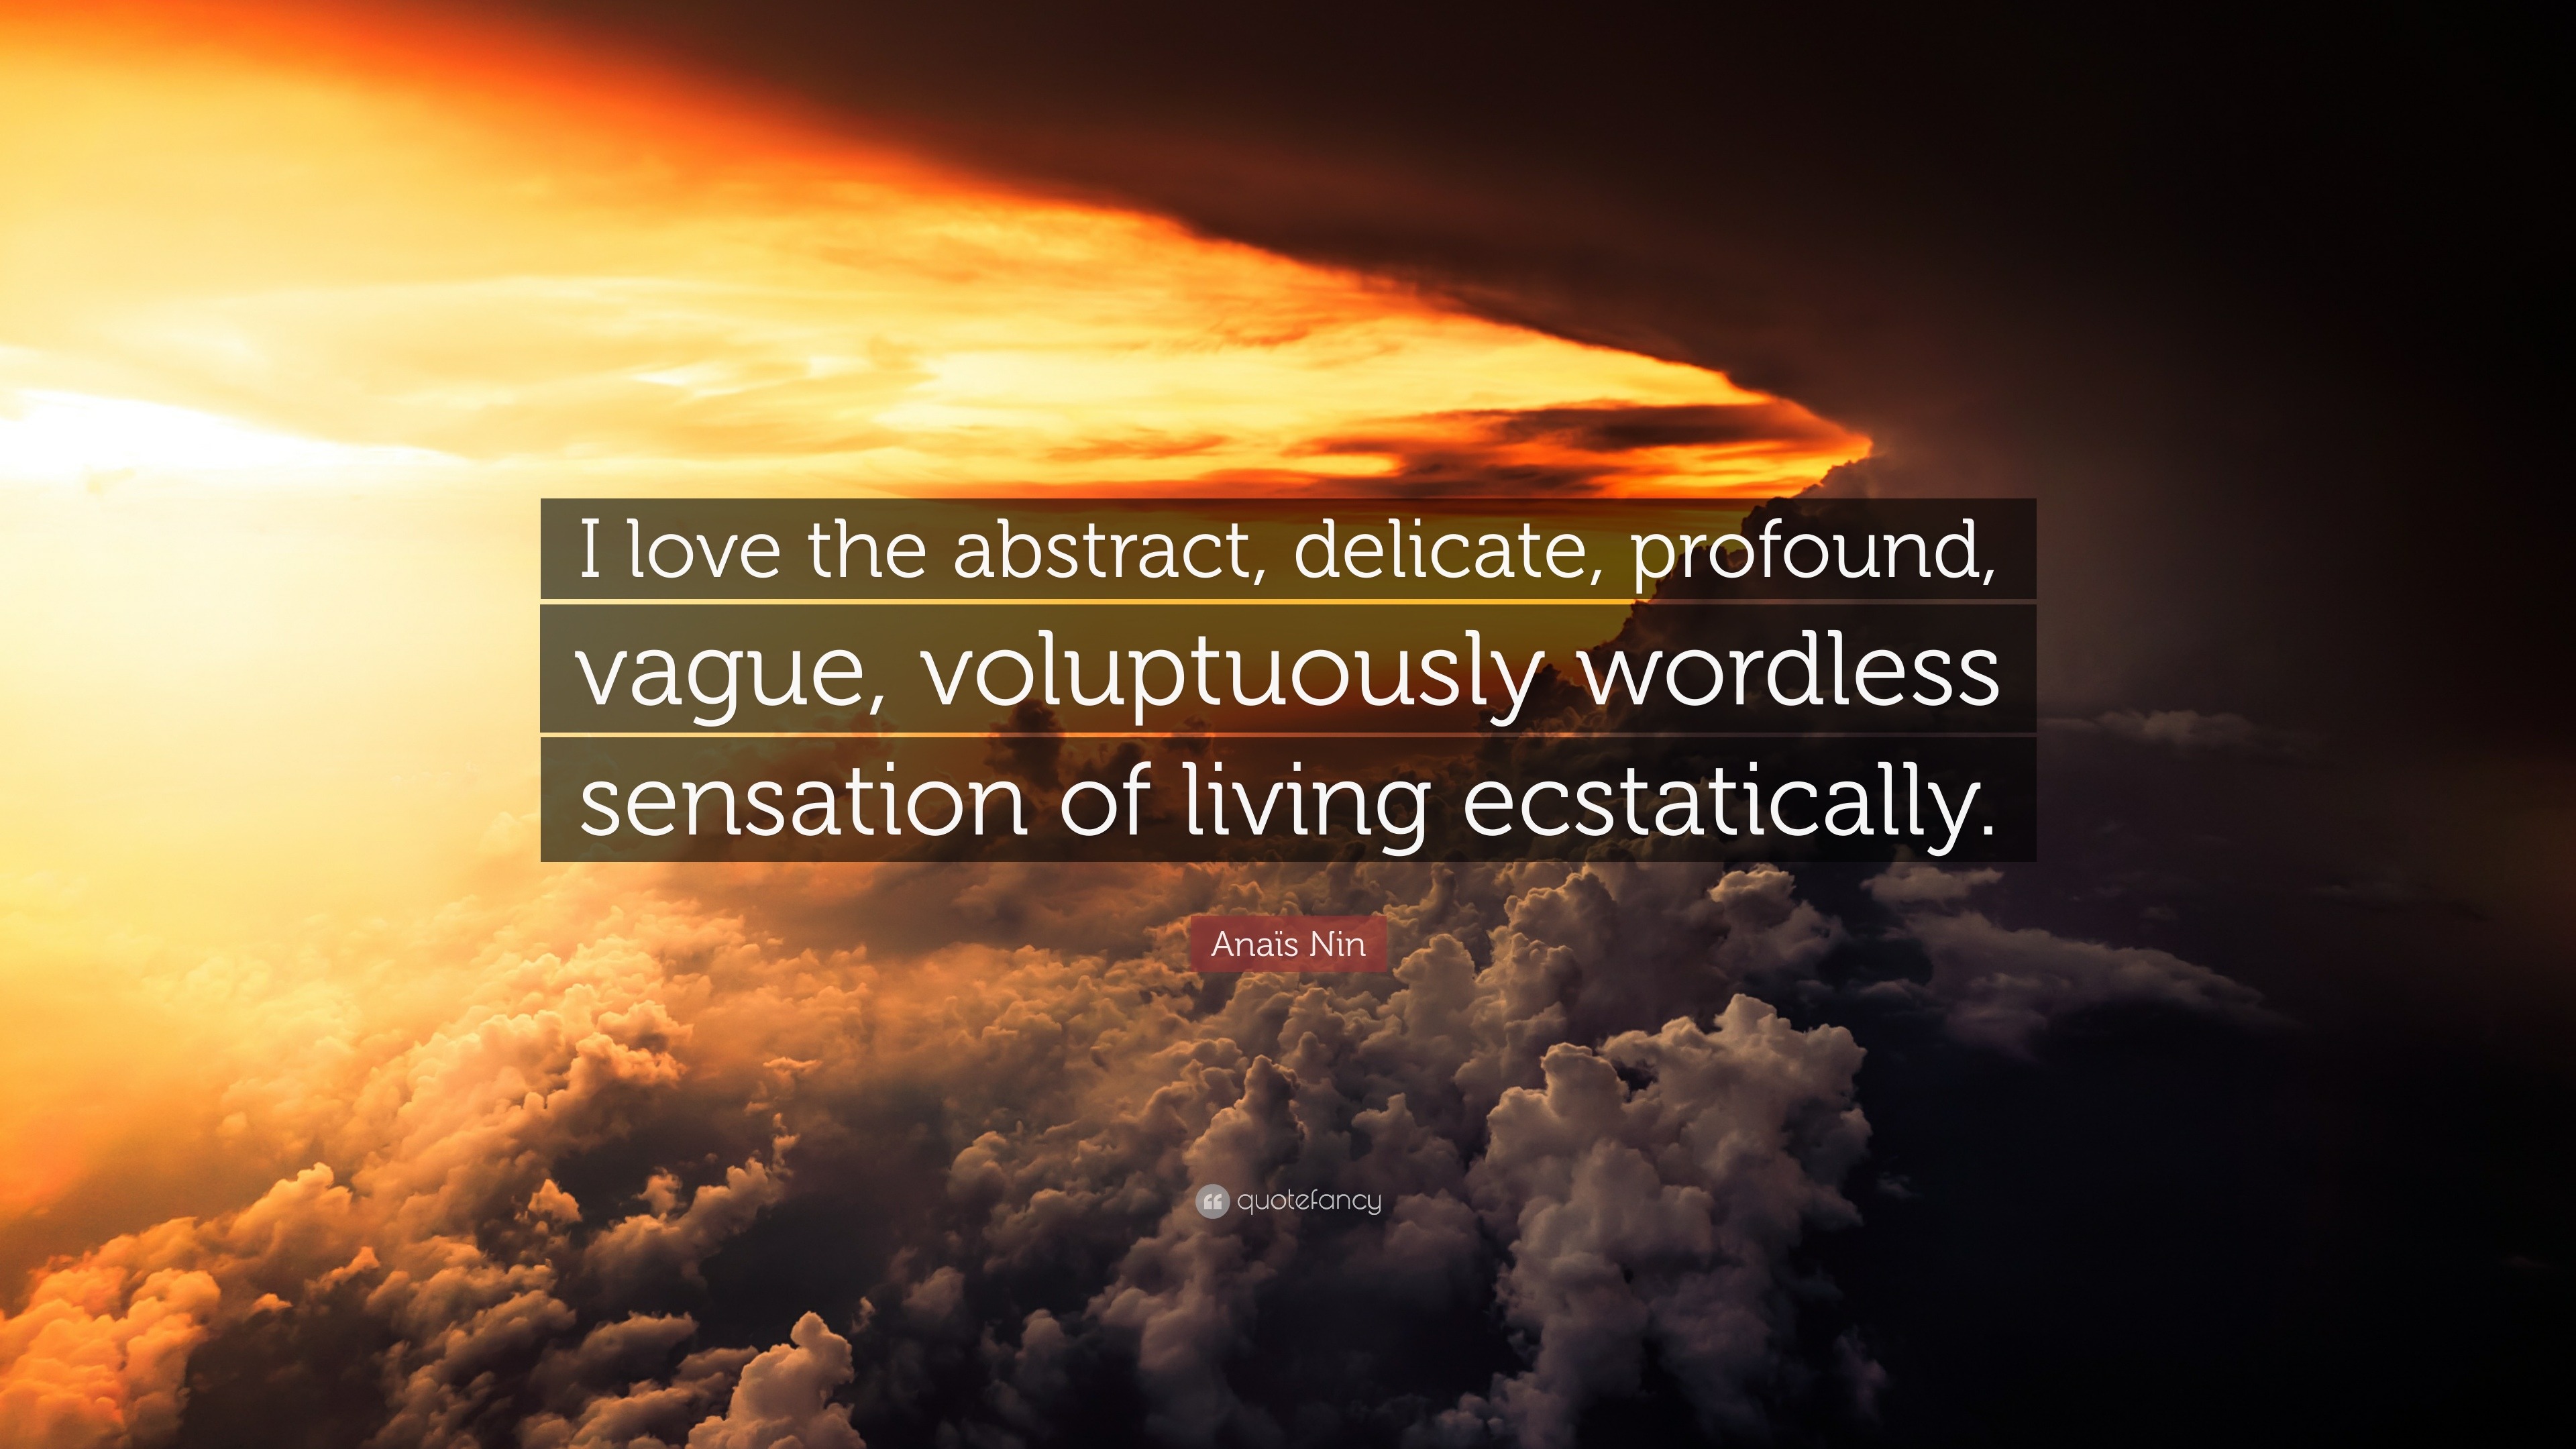 Anaïs Nin Quote “i Love The Abstract Delicate Profound Vague Voluptuously Wordless